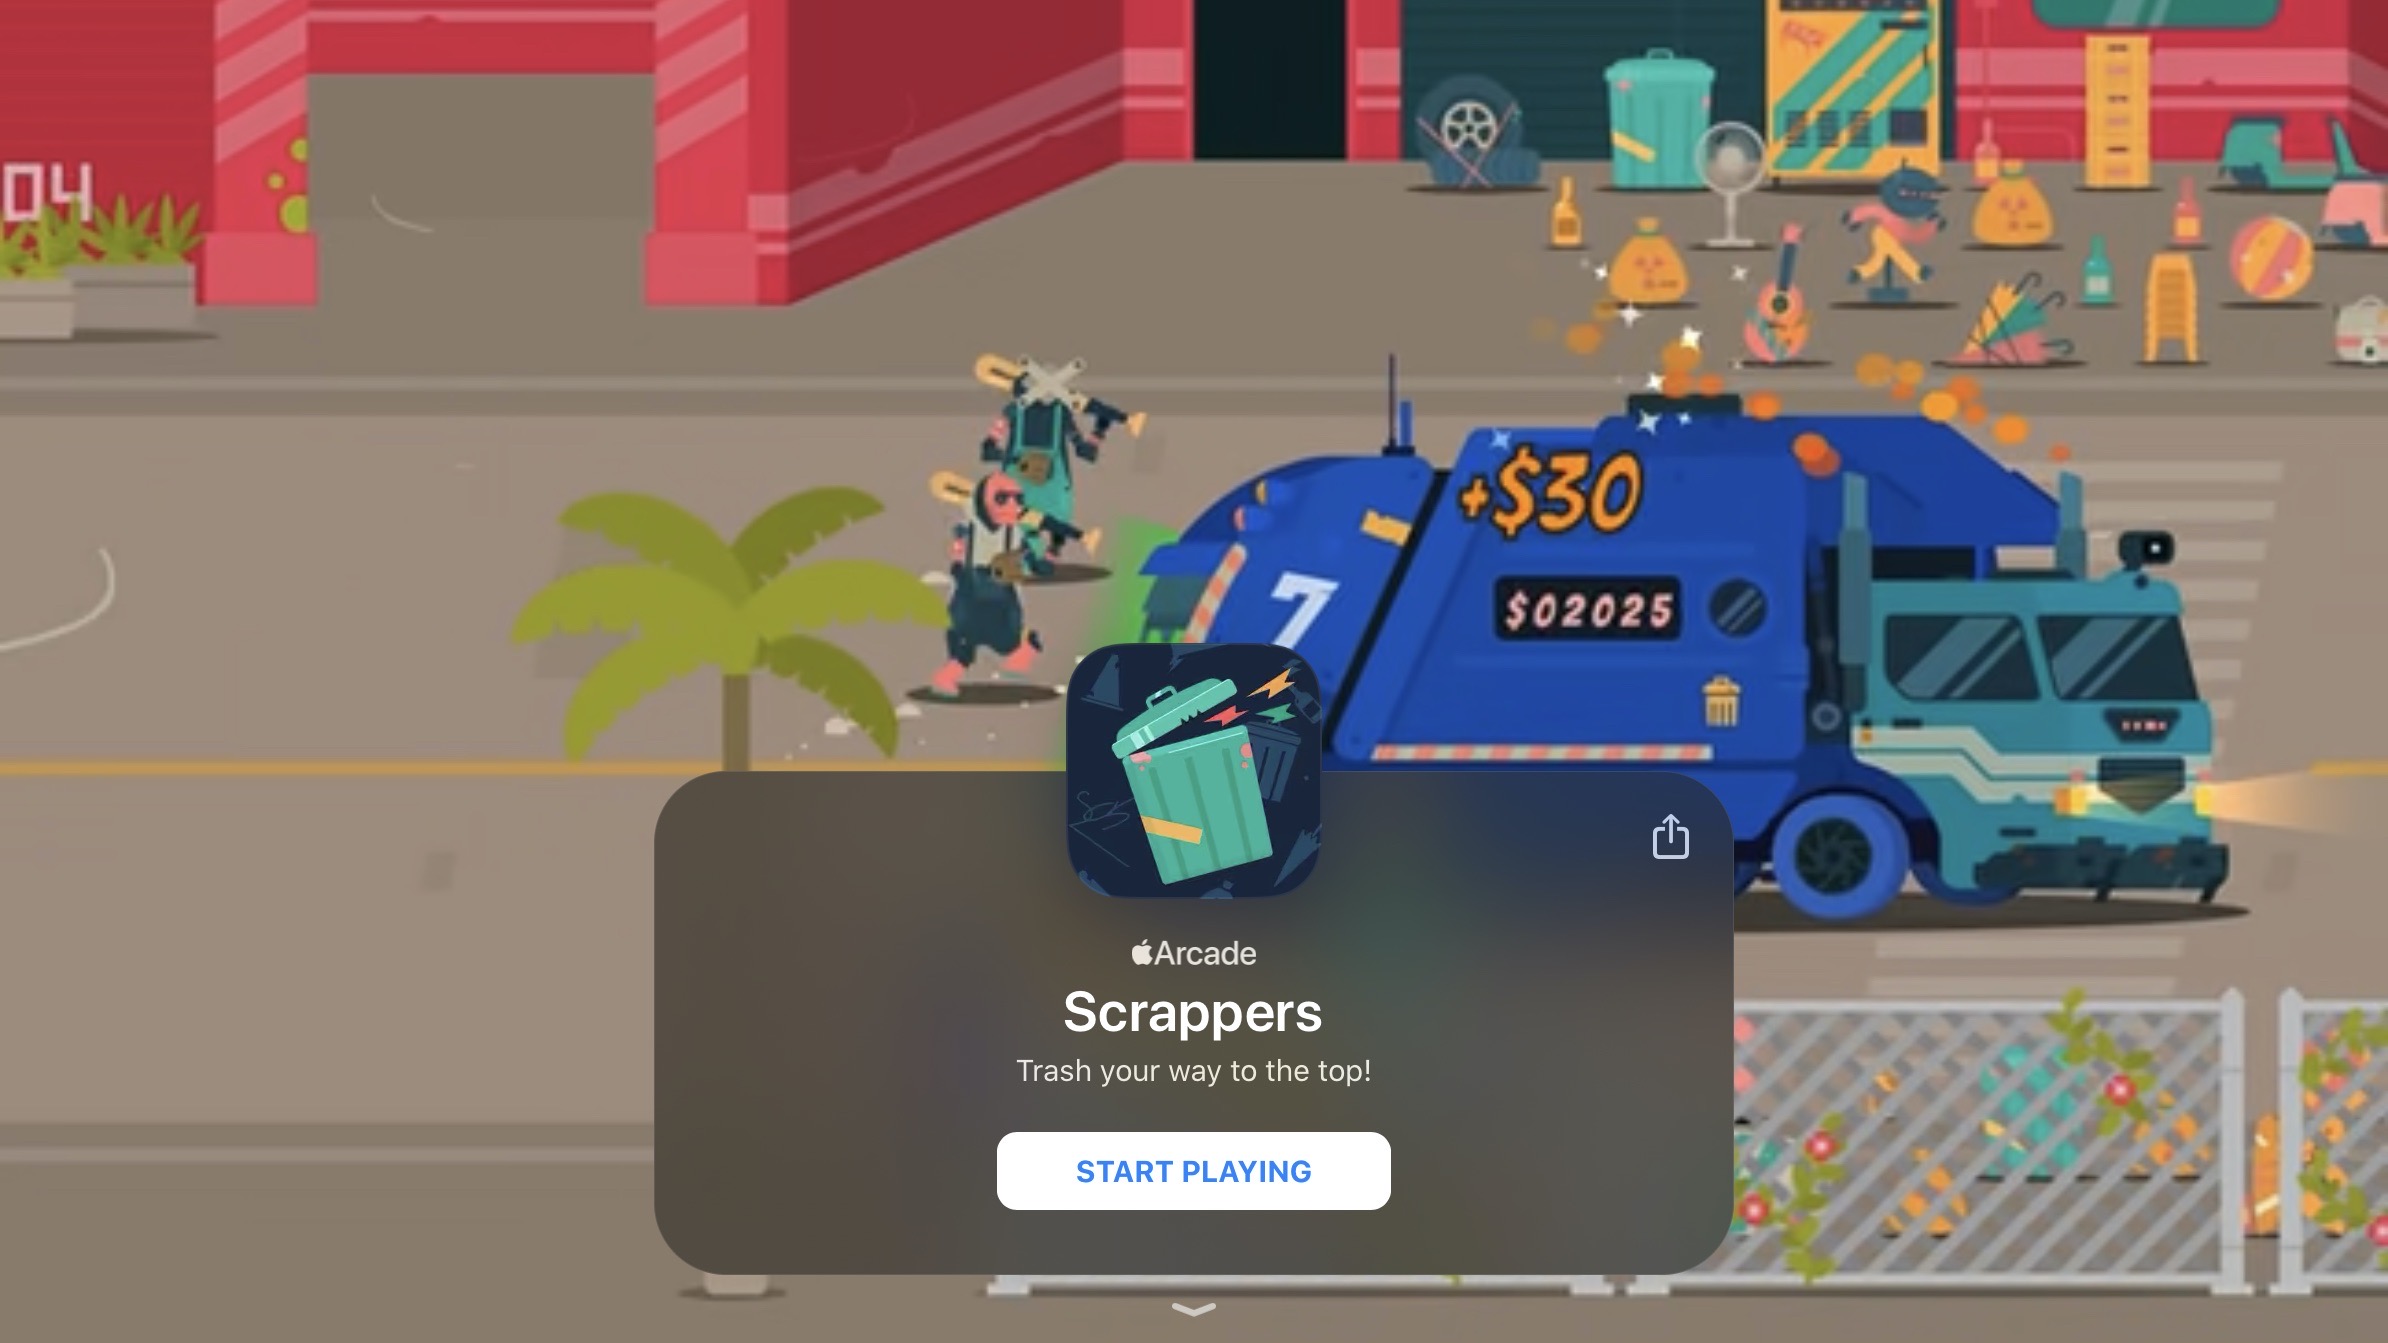 Apple Arcade new game 4/10 Scrappers